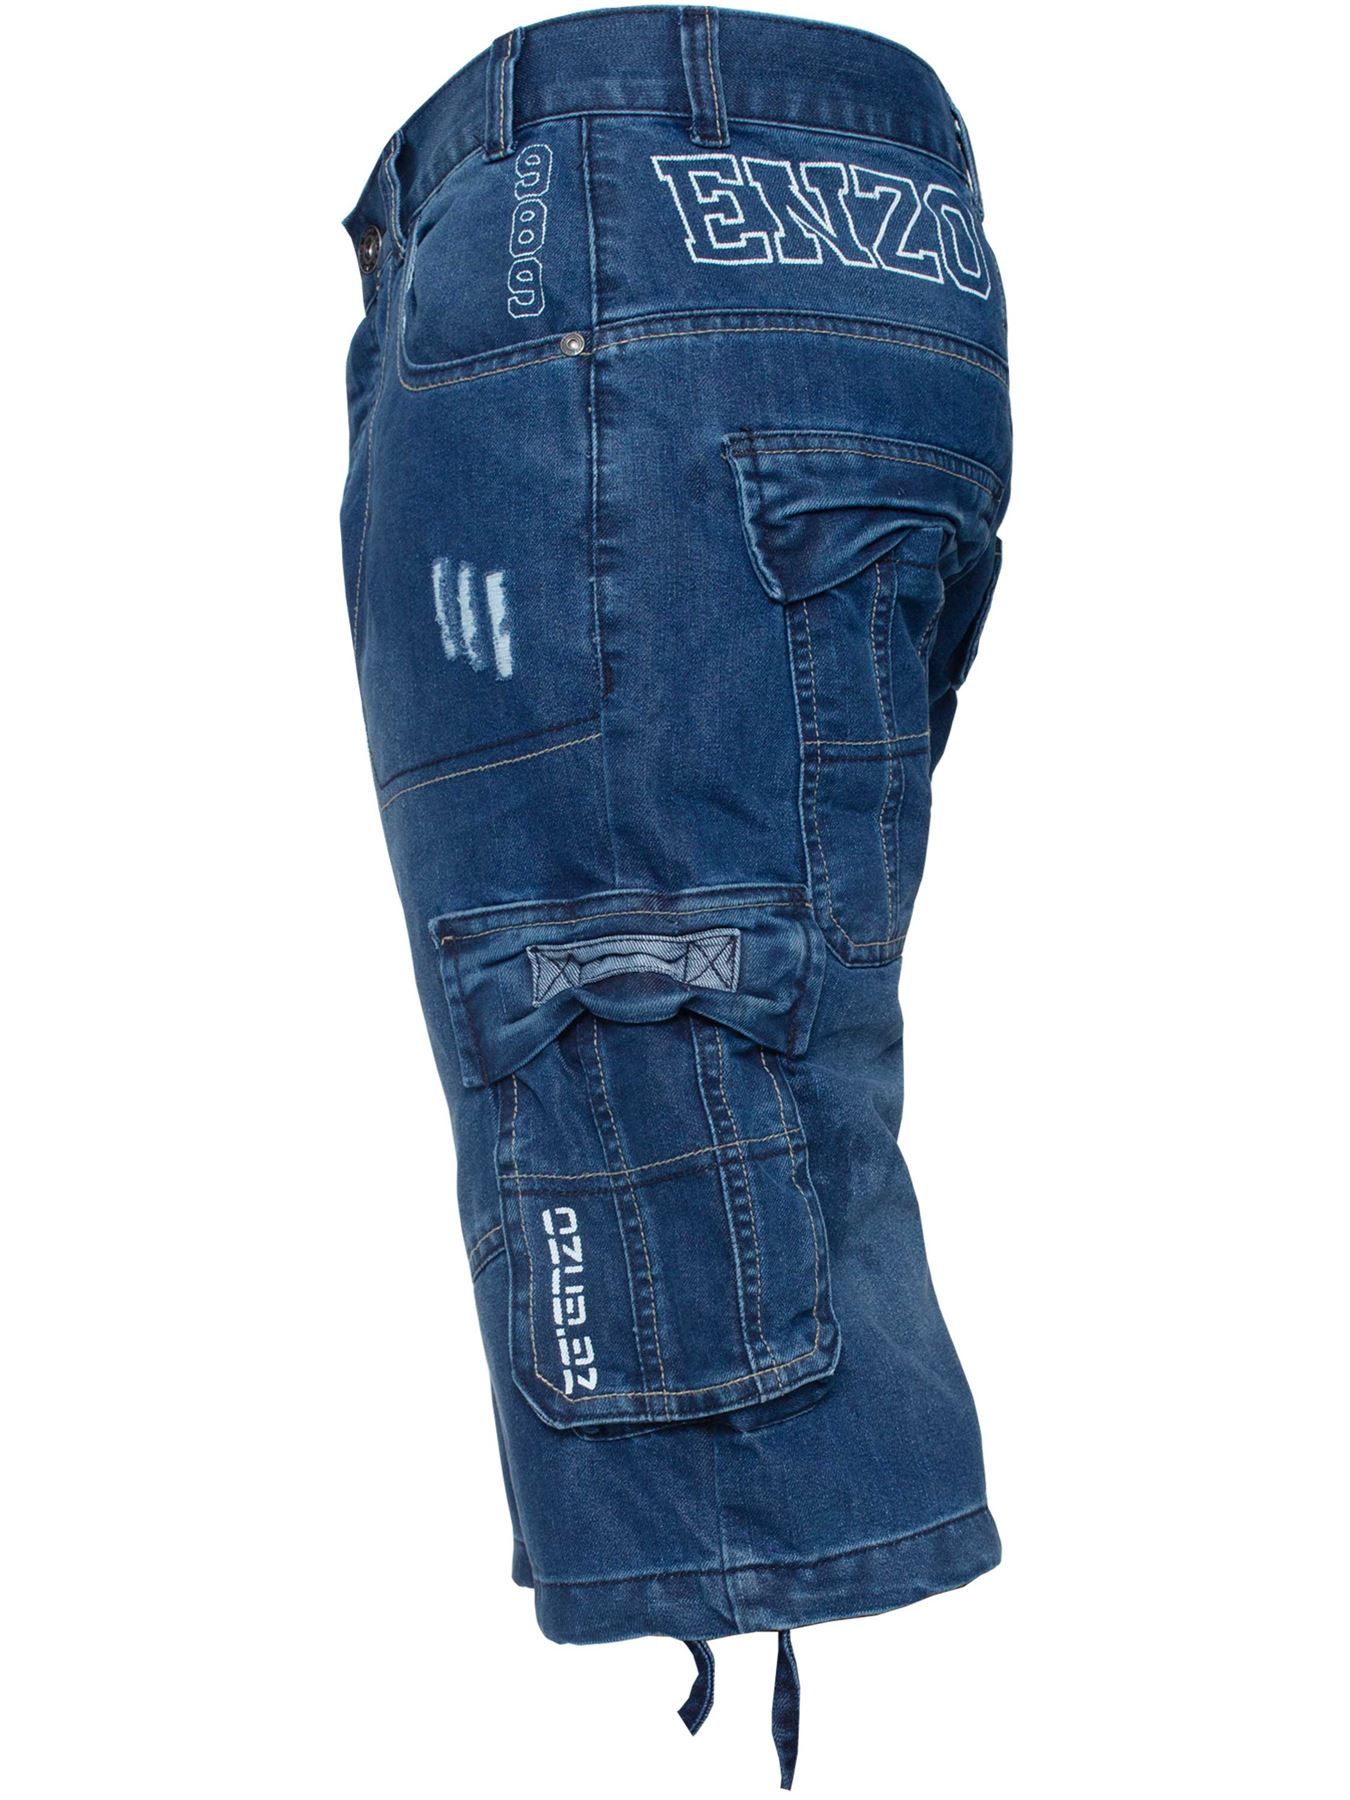 These EZS404 Enzo Mens Cargo Combat Shorts features 2 front pockets, 2 back pockets, 2 side 1- Coin pockets, Branded Buttons and Rivets, and a zip fly fastening. Crafted from 60% Cotton and 40% Polyester, these Loose comfortable and sturdy Combat Denim Shorts are available in 28” Inside Leg only. The sizes in the dropdown are in Inches.